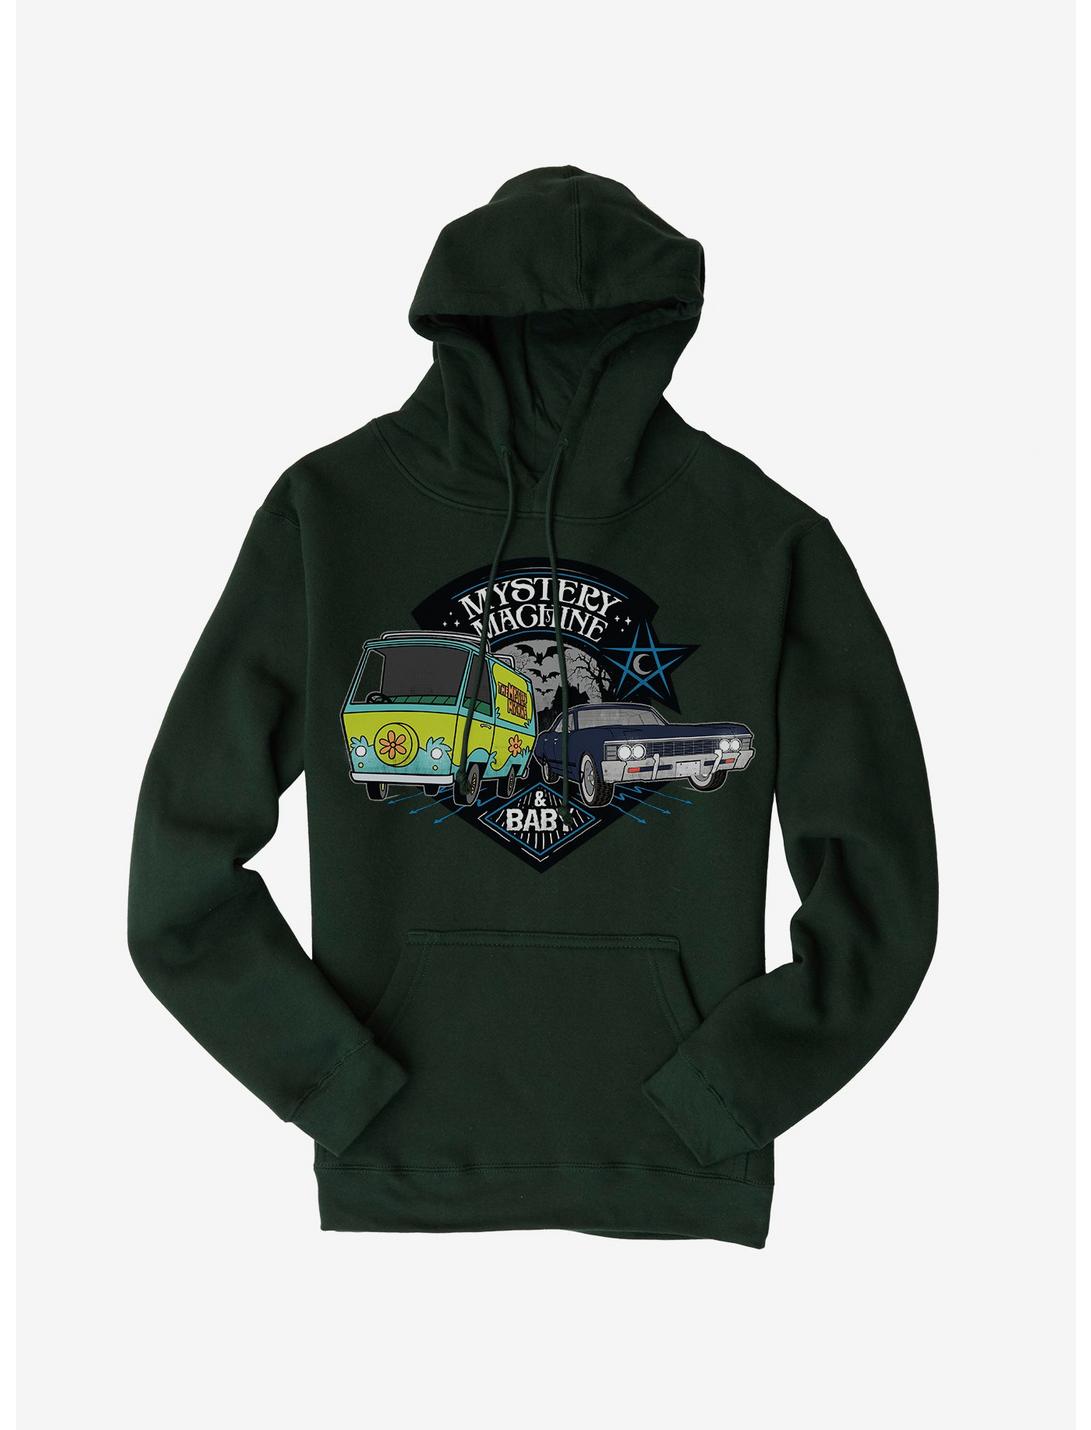 Supernatural Scoobynatural Mystery Machine Hoodie, FOREST, hi-res